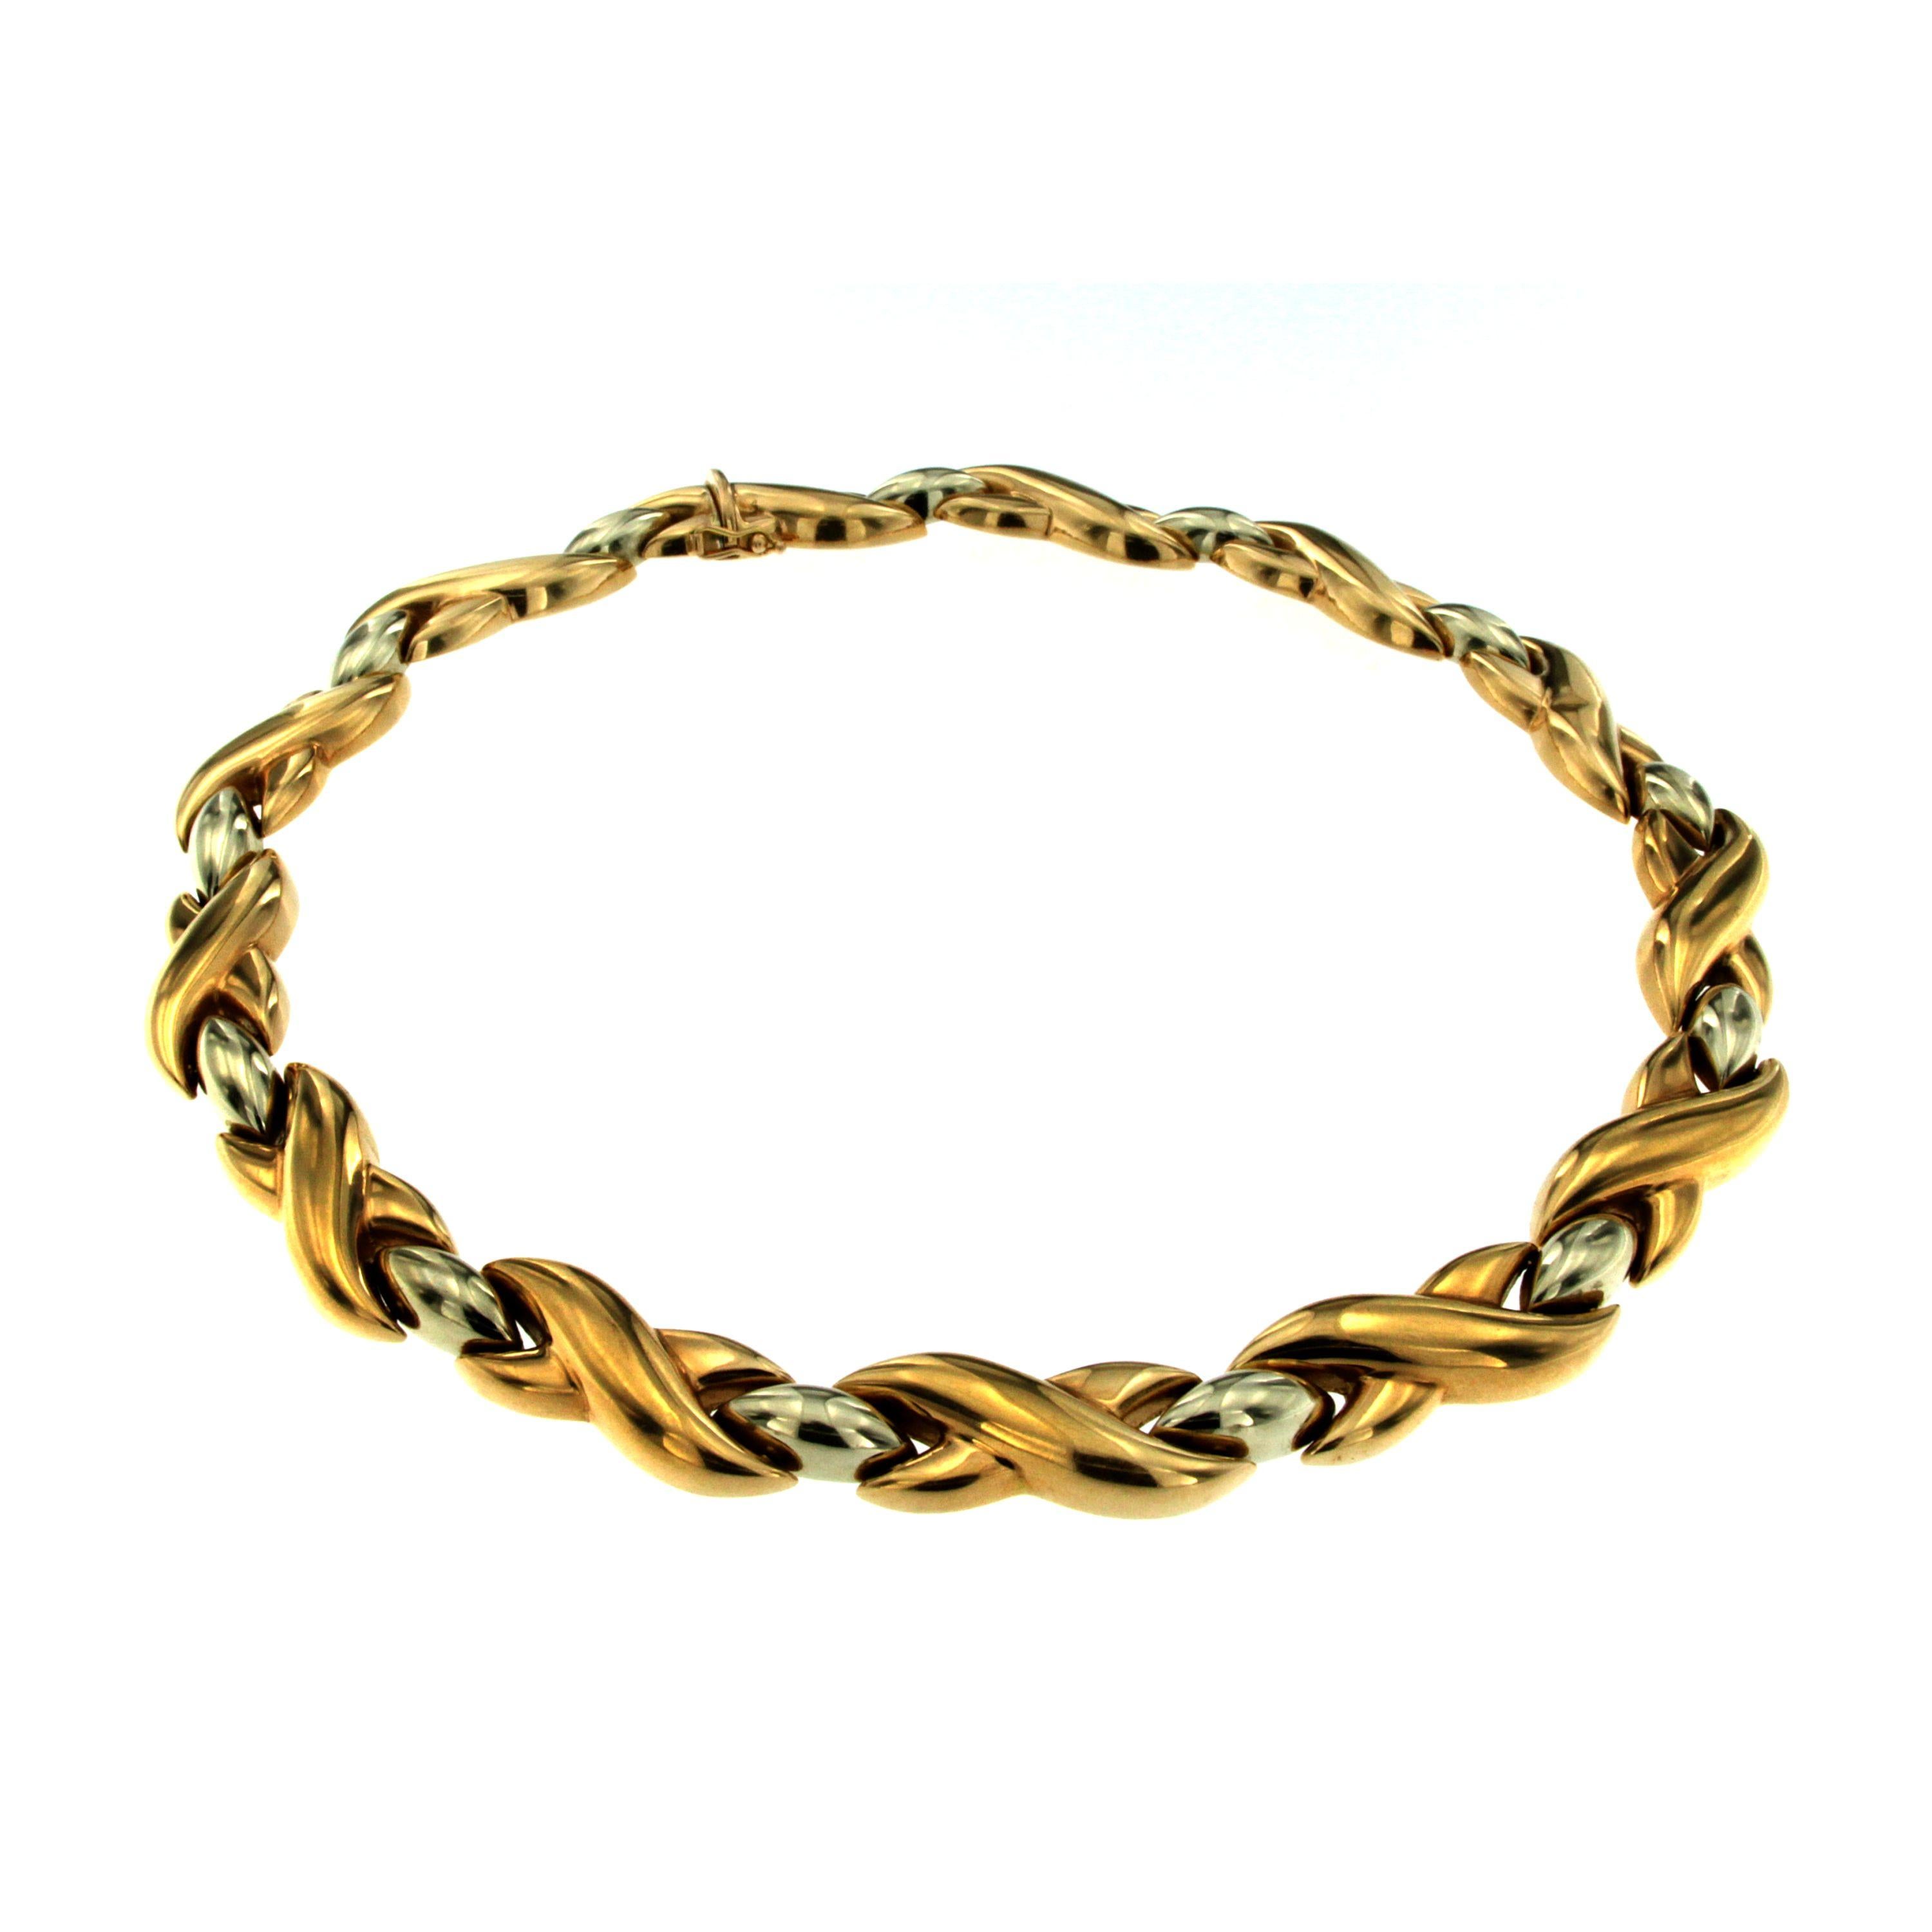 Timeless 18K yellow gold Cartier Link Necklace alternating the popular 